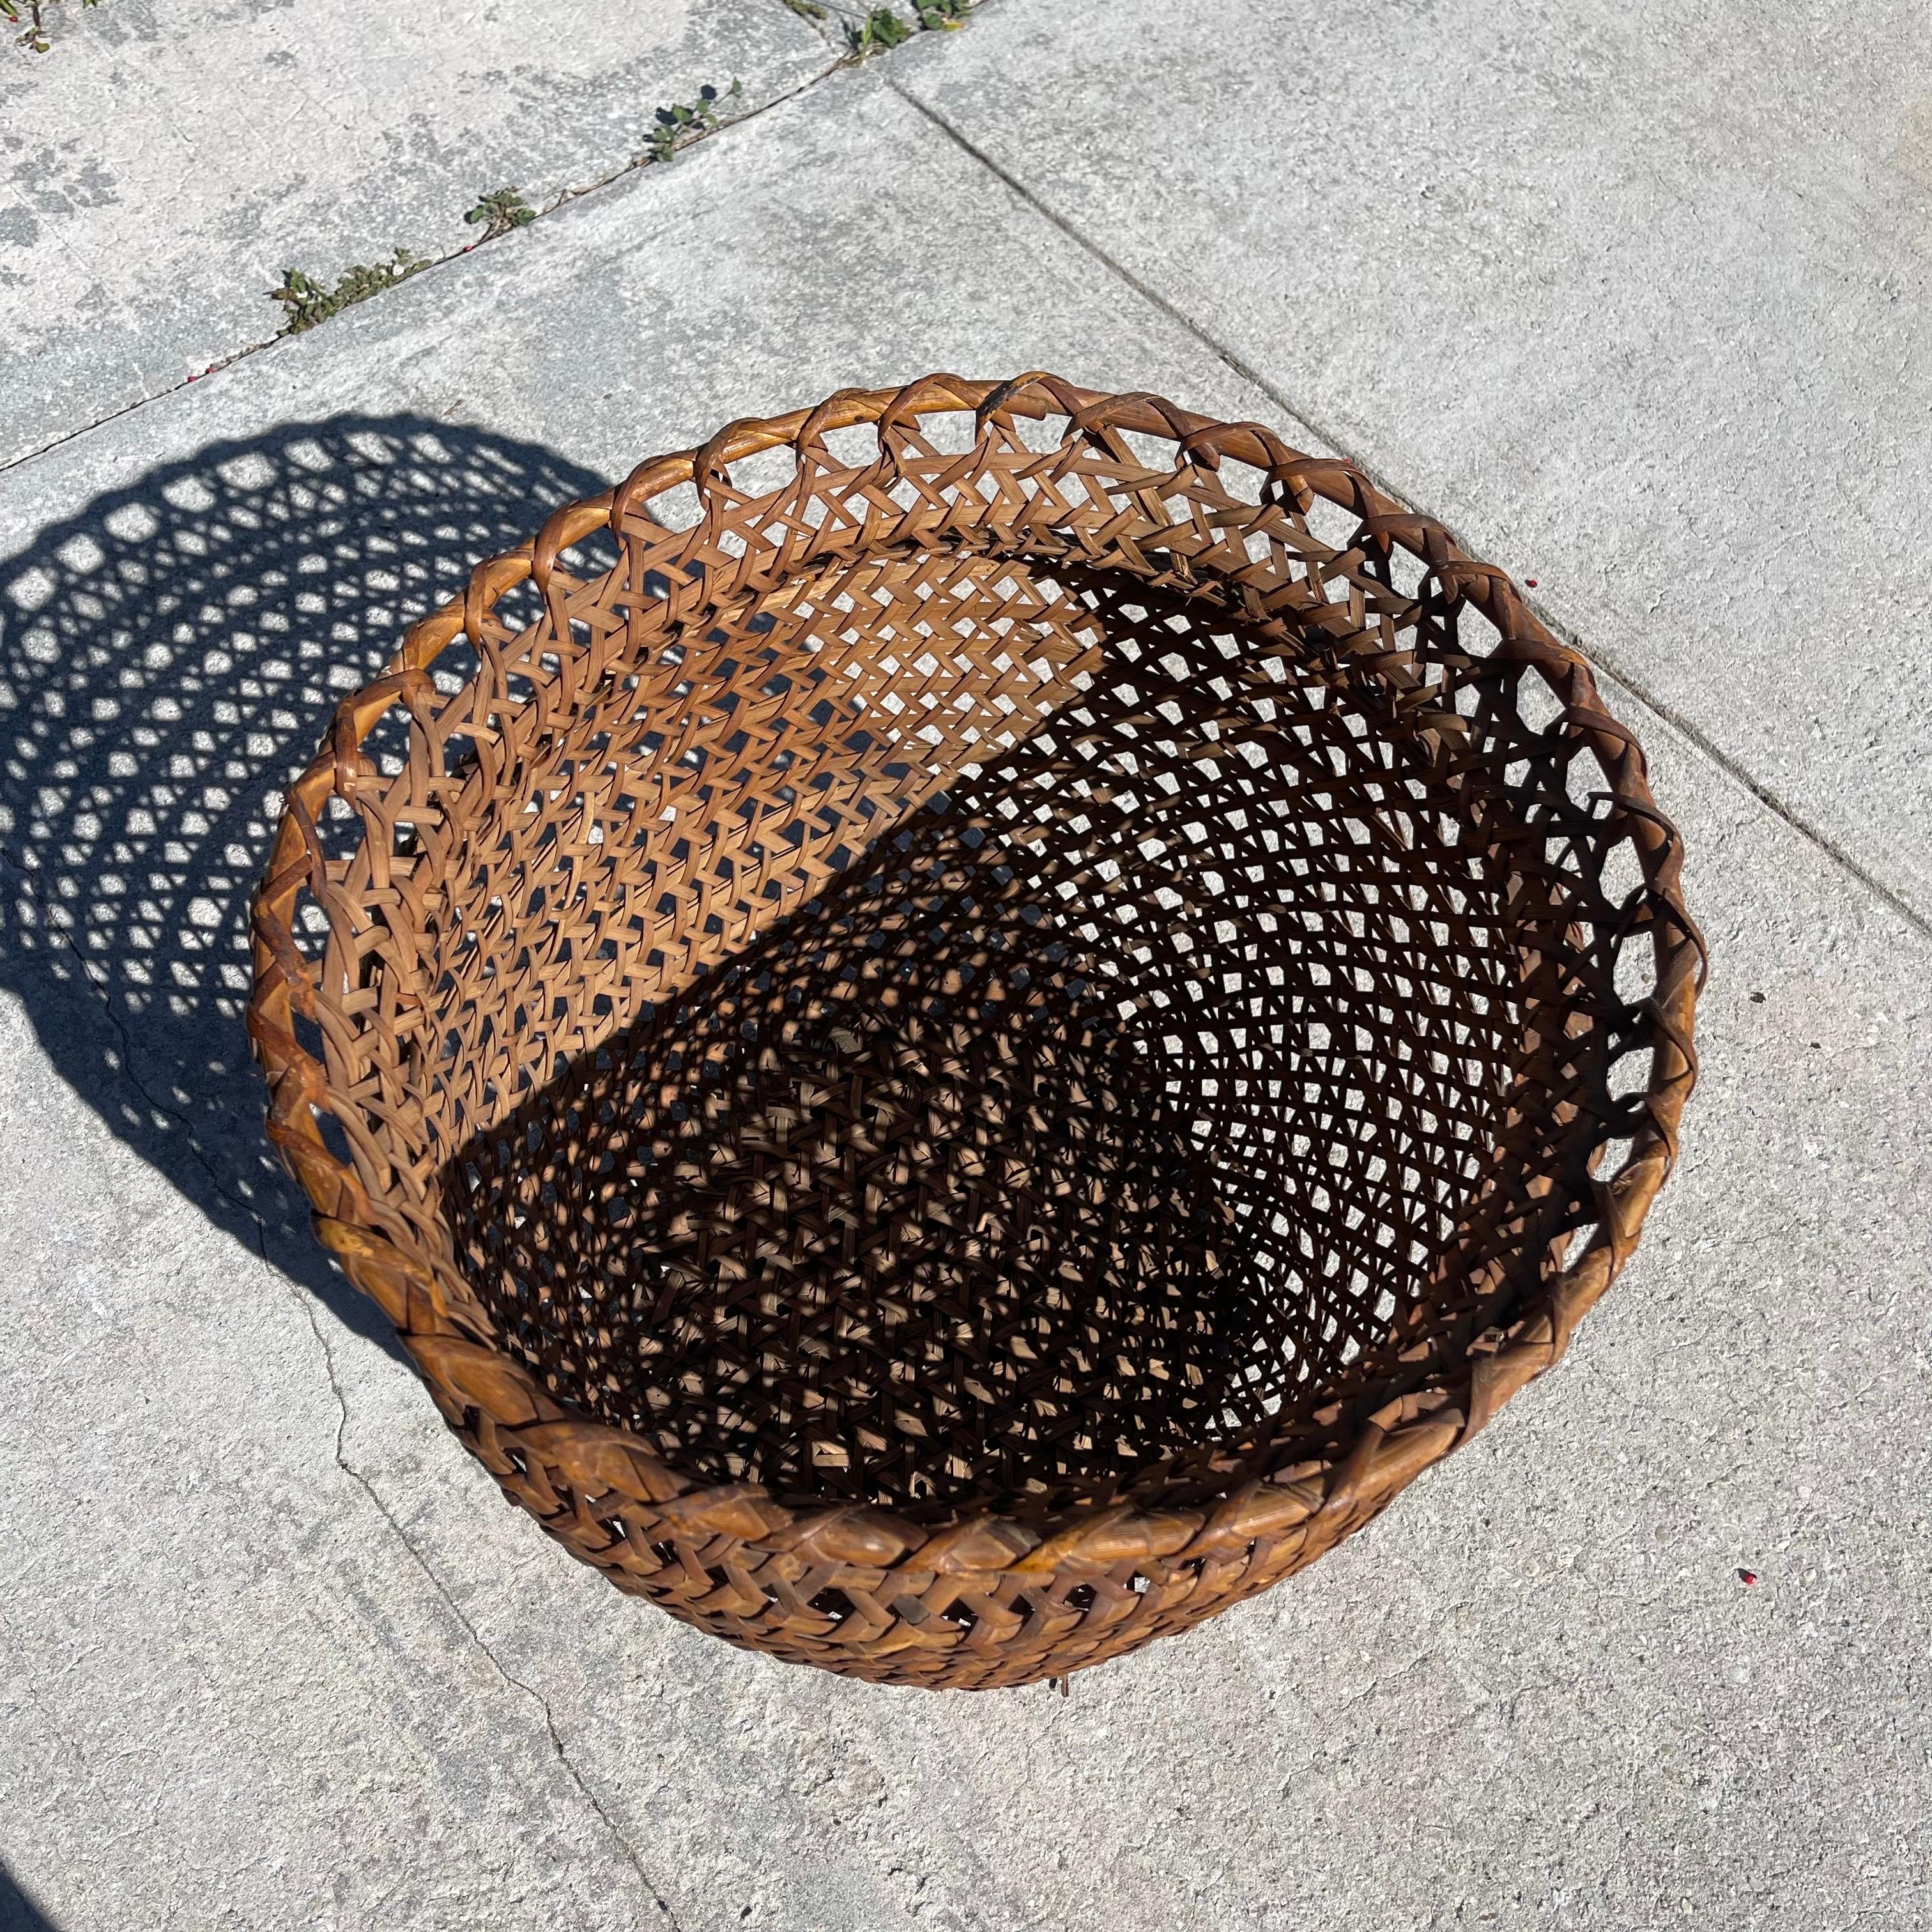 Mid-20th Century Handwoven Cane Wicker Rattan Basket For Sale 1